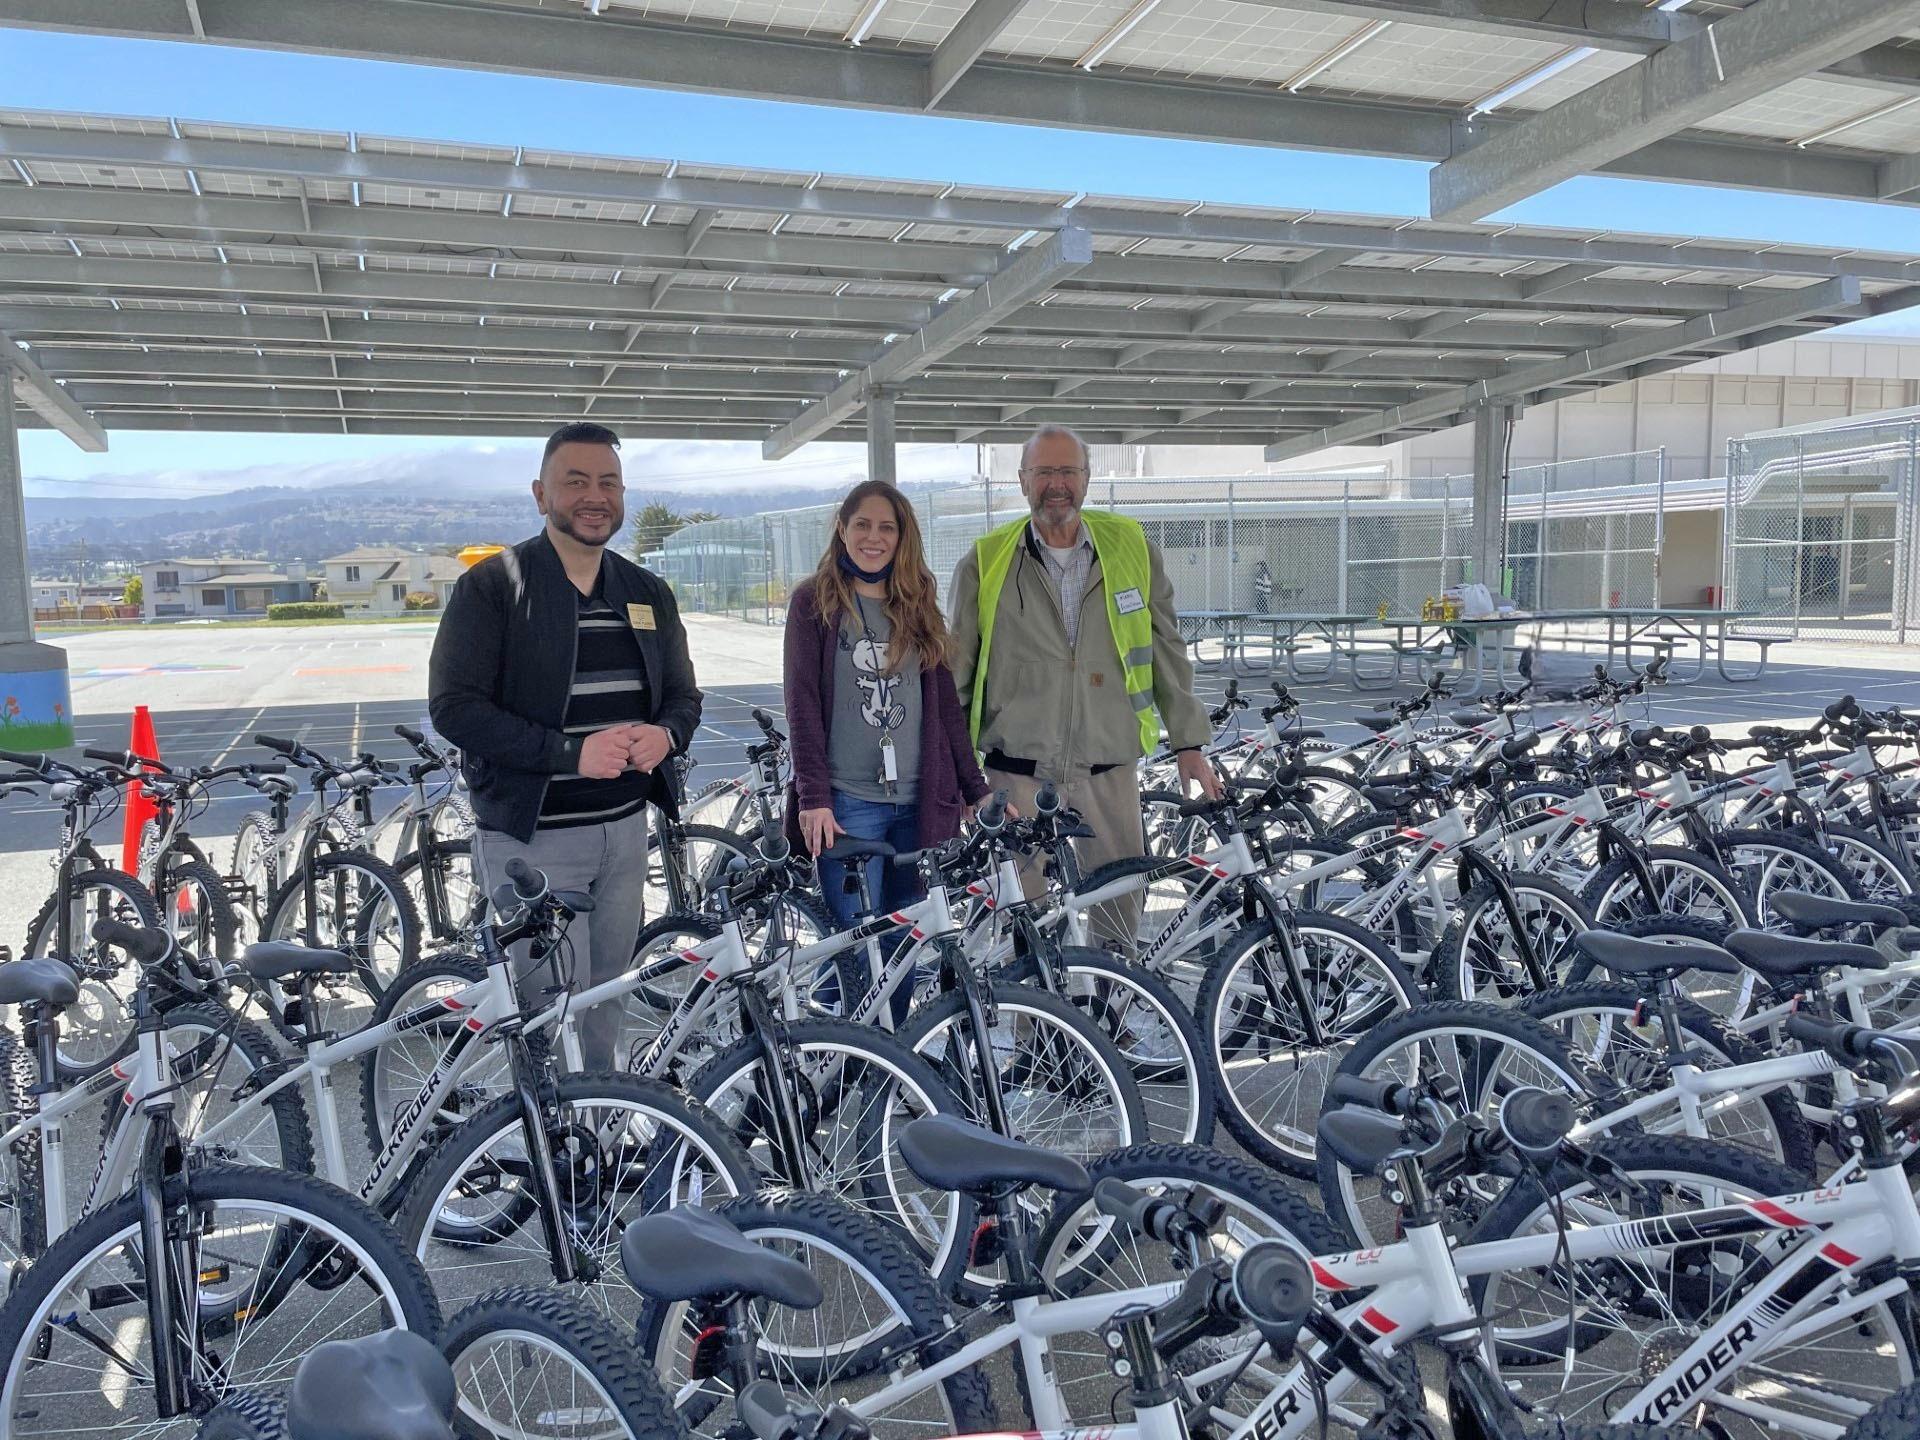 Sunshine Gardens Elementary School Principal Leticia Gonzalez poses with South San Francisco Council Members Eddie Flores and Mark Addiego during the city of South San Francisco's 2023 bike giveaway event.